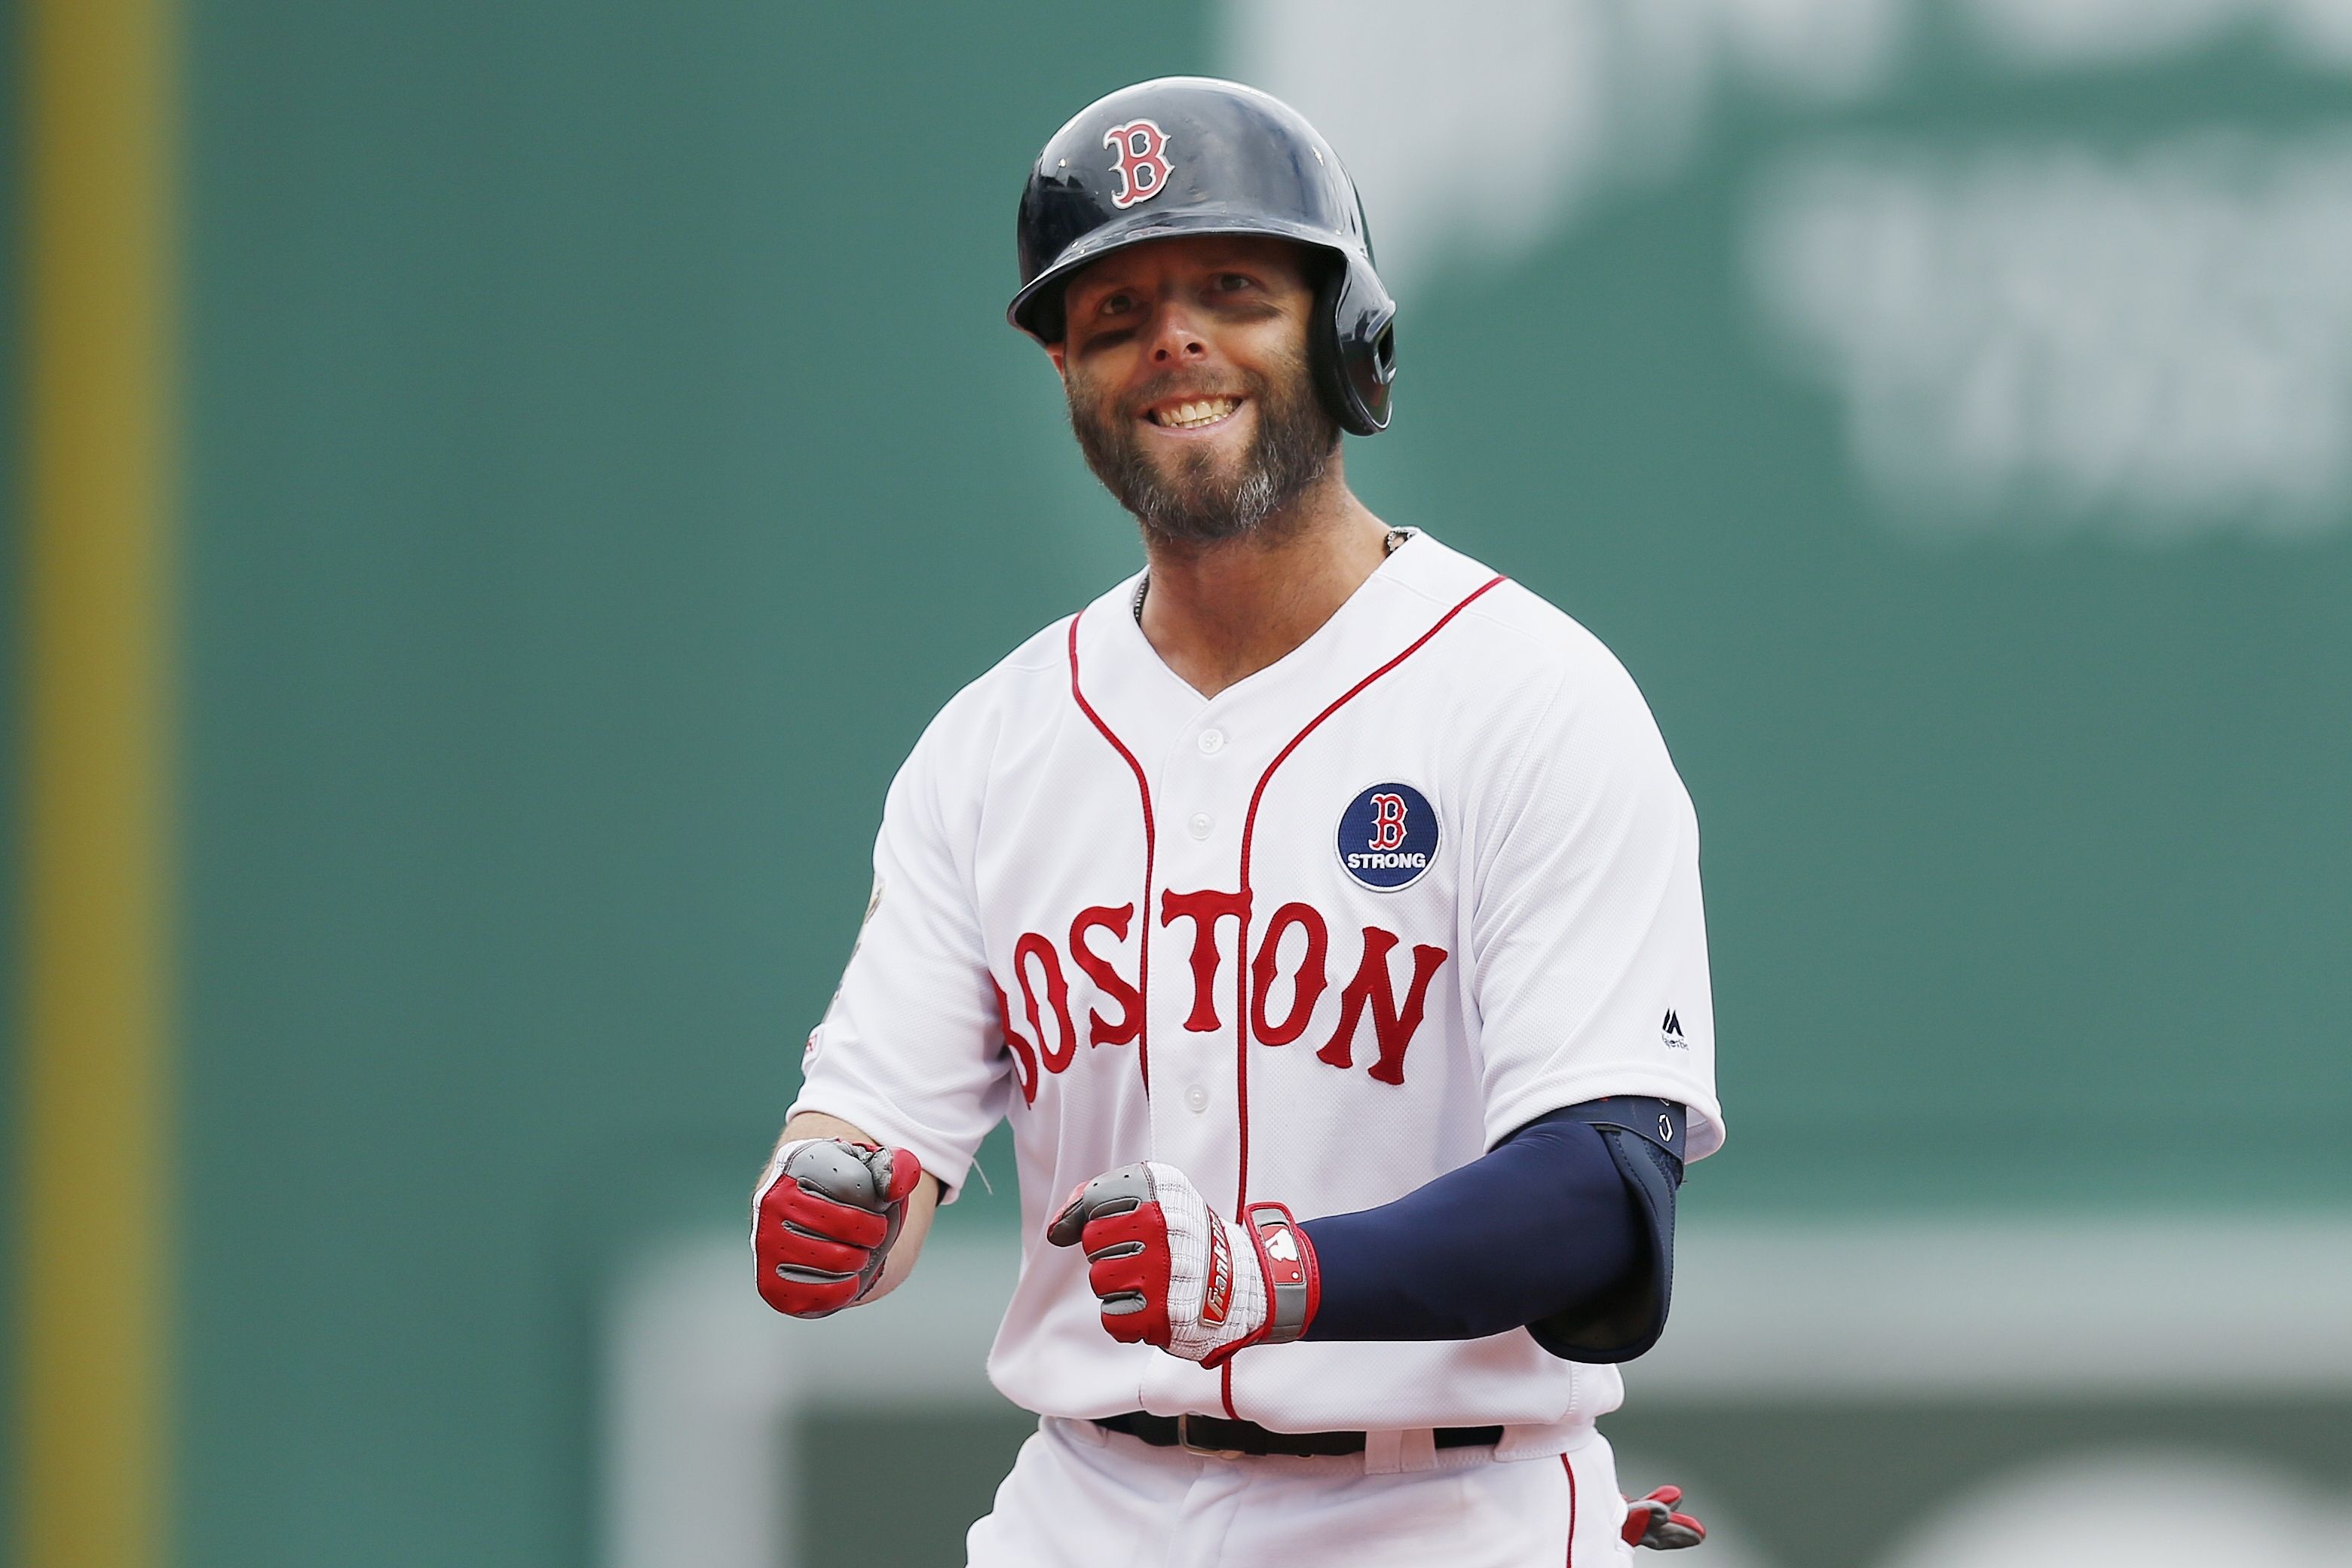 Dustin Pedroia reflects on Red Sox career after retirement: 'I was